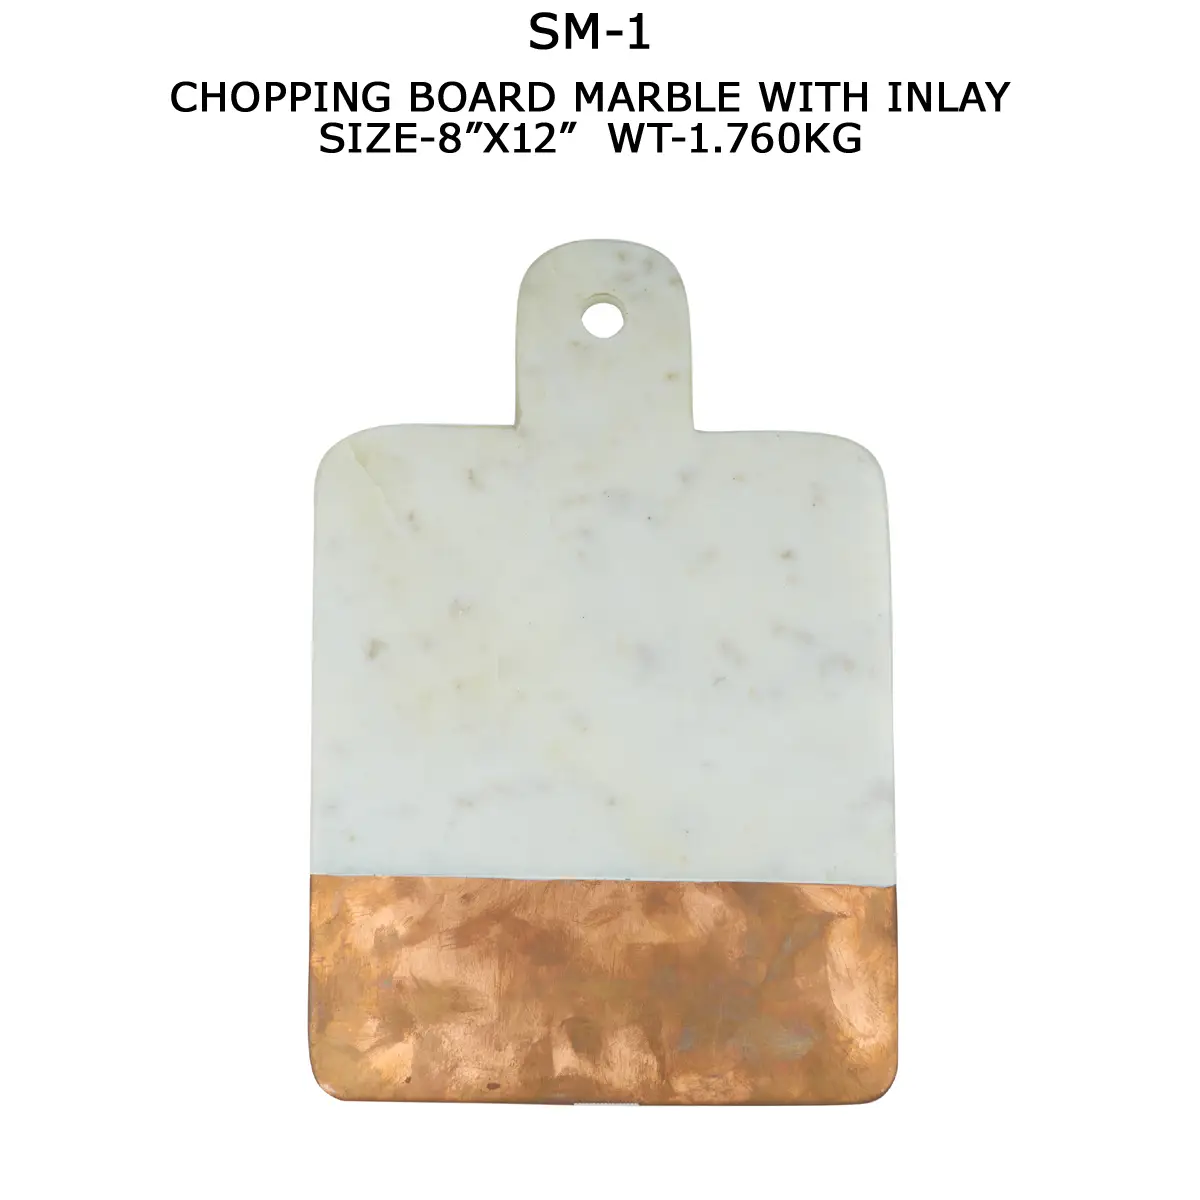 CHOPPING BOARD MARBLE WITH INLAY